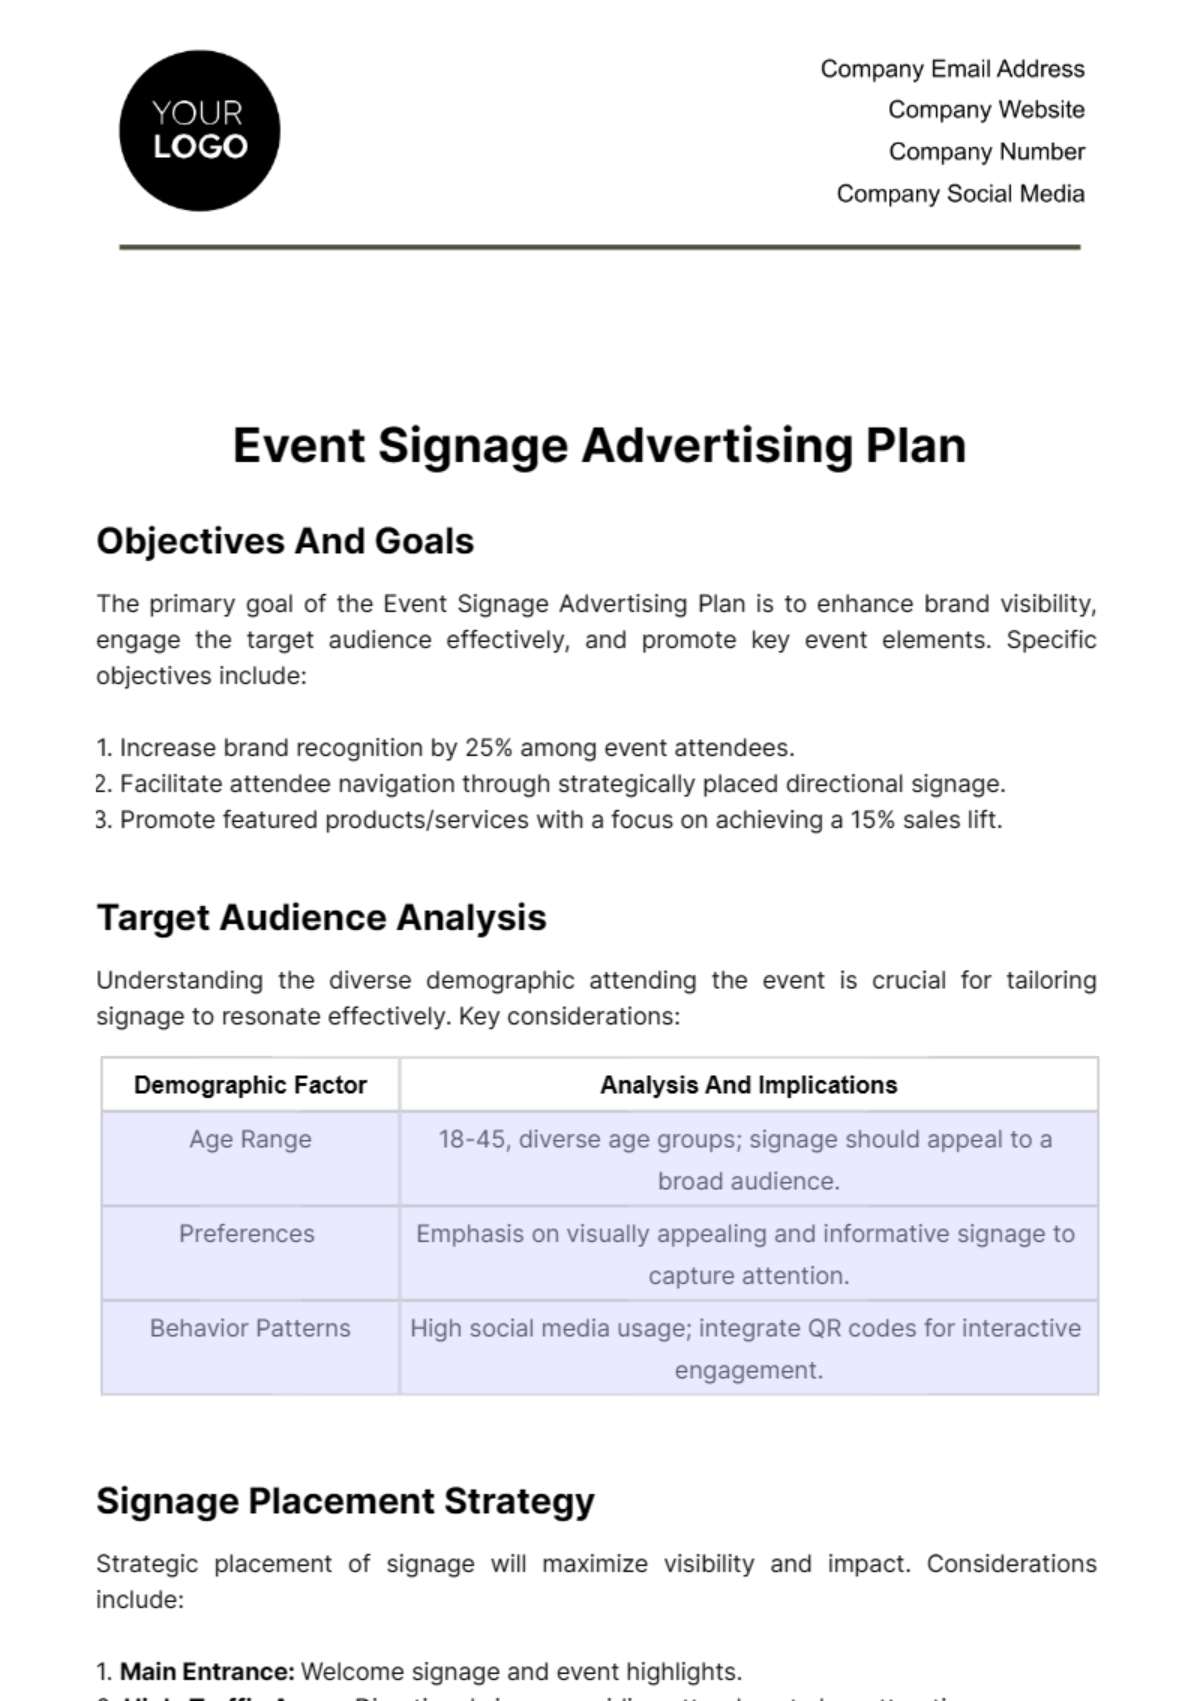 Event Signage Advertising Plan Template